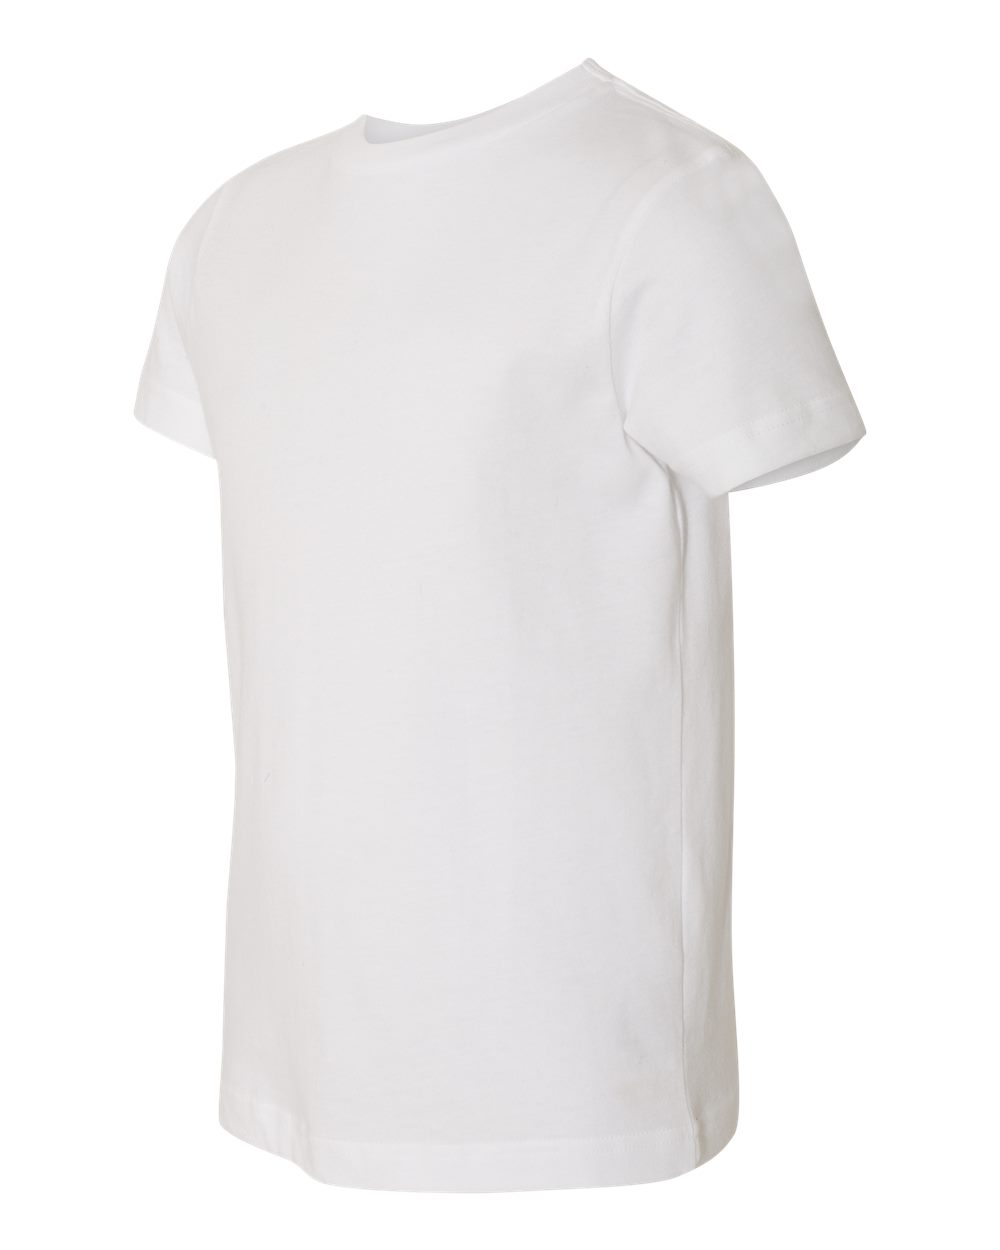 LAT 6180 - Youth Heavyweight Combed Ringspun Cotton T-Shirt